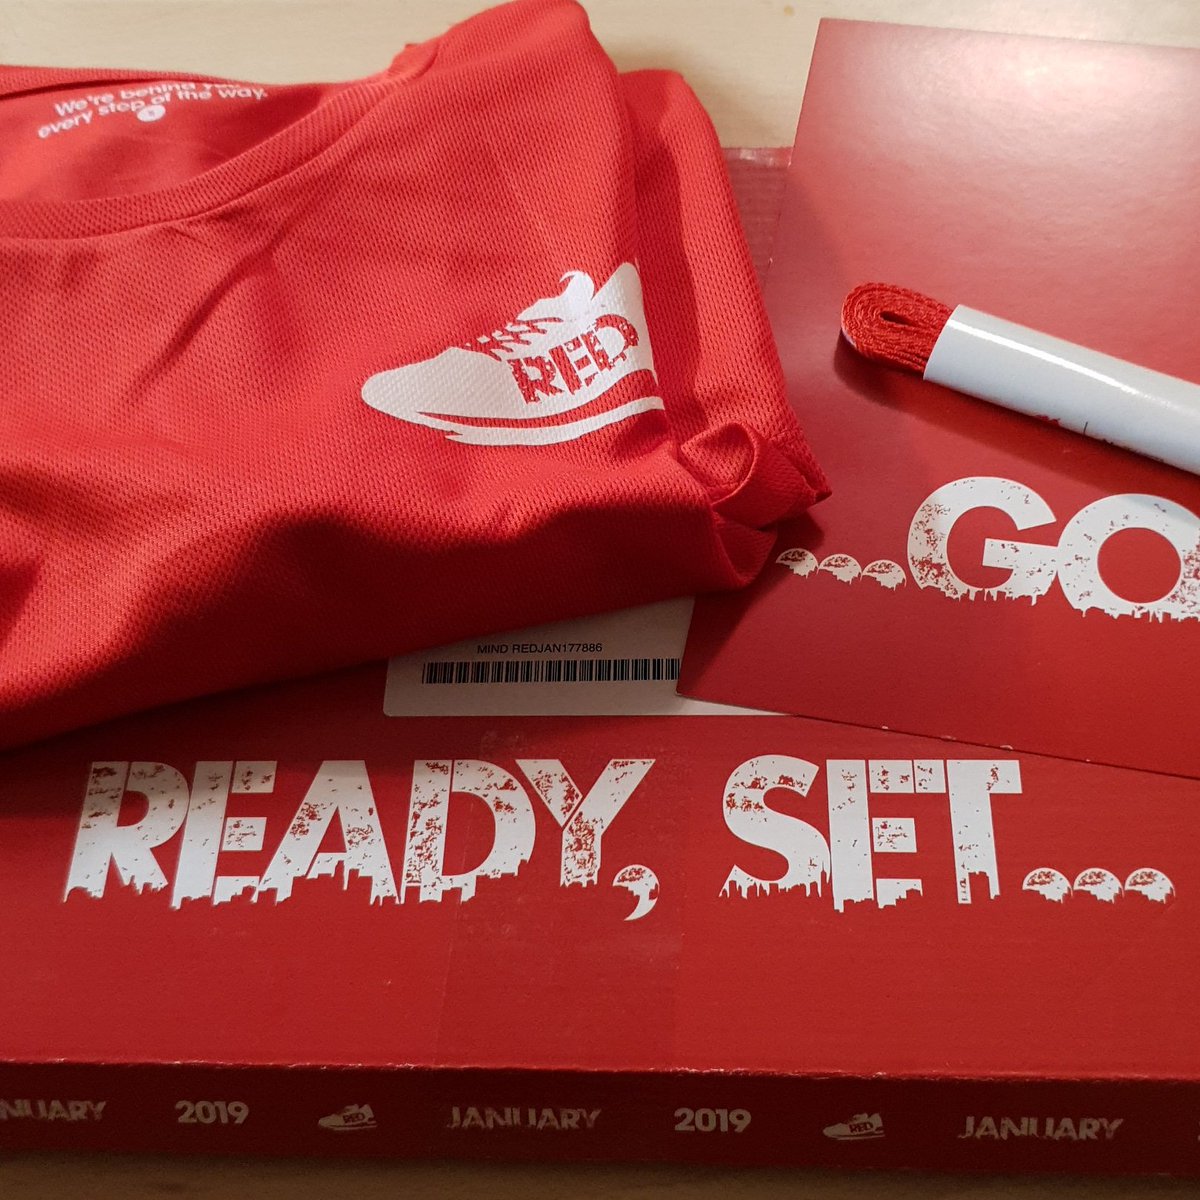 @REDJanuaryUK mail arrived!
2019 will be my 2nd #REDJanuary #moveeveryday @MindCharity
Great idea!
Who else is in??